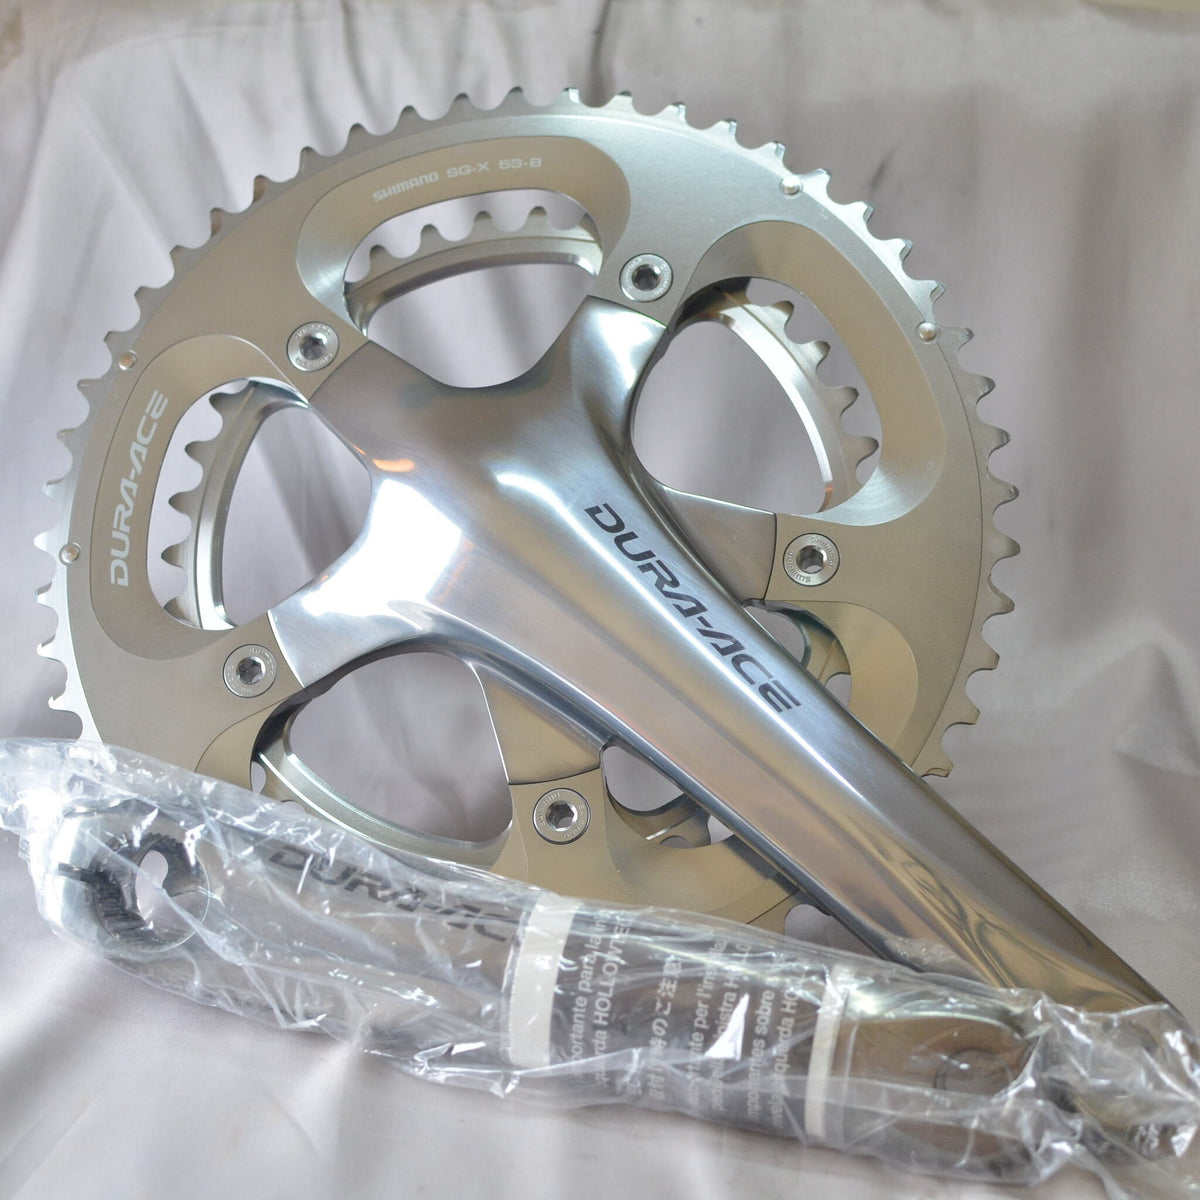 NEW Shimano Dura Ace 7800 FC-7800 172.5mm 53-39 10 Speed Double Cranks